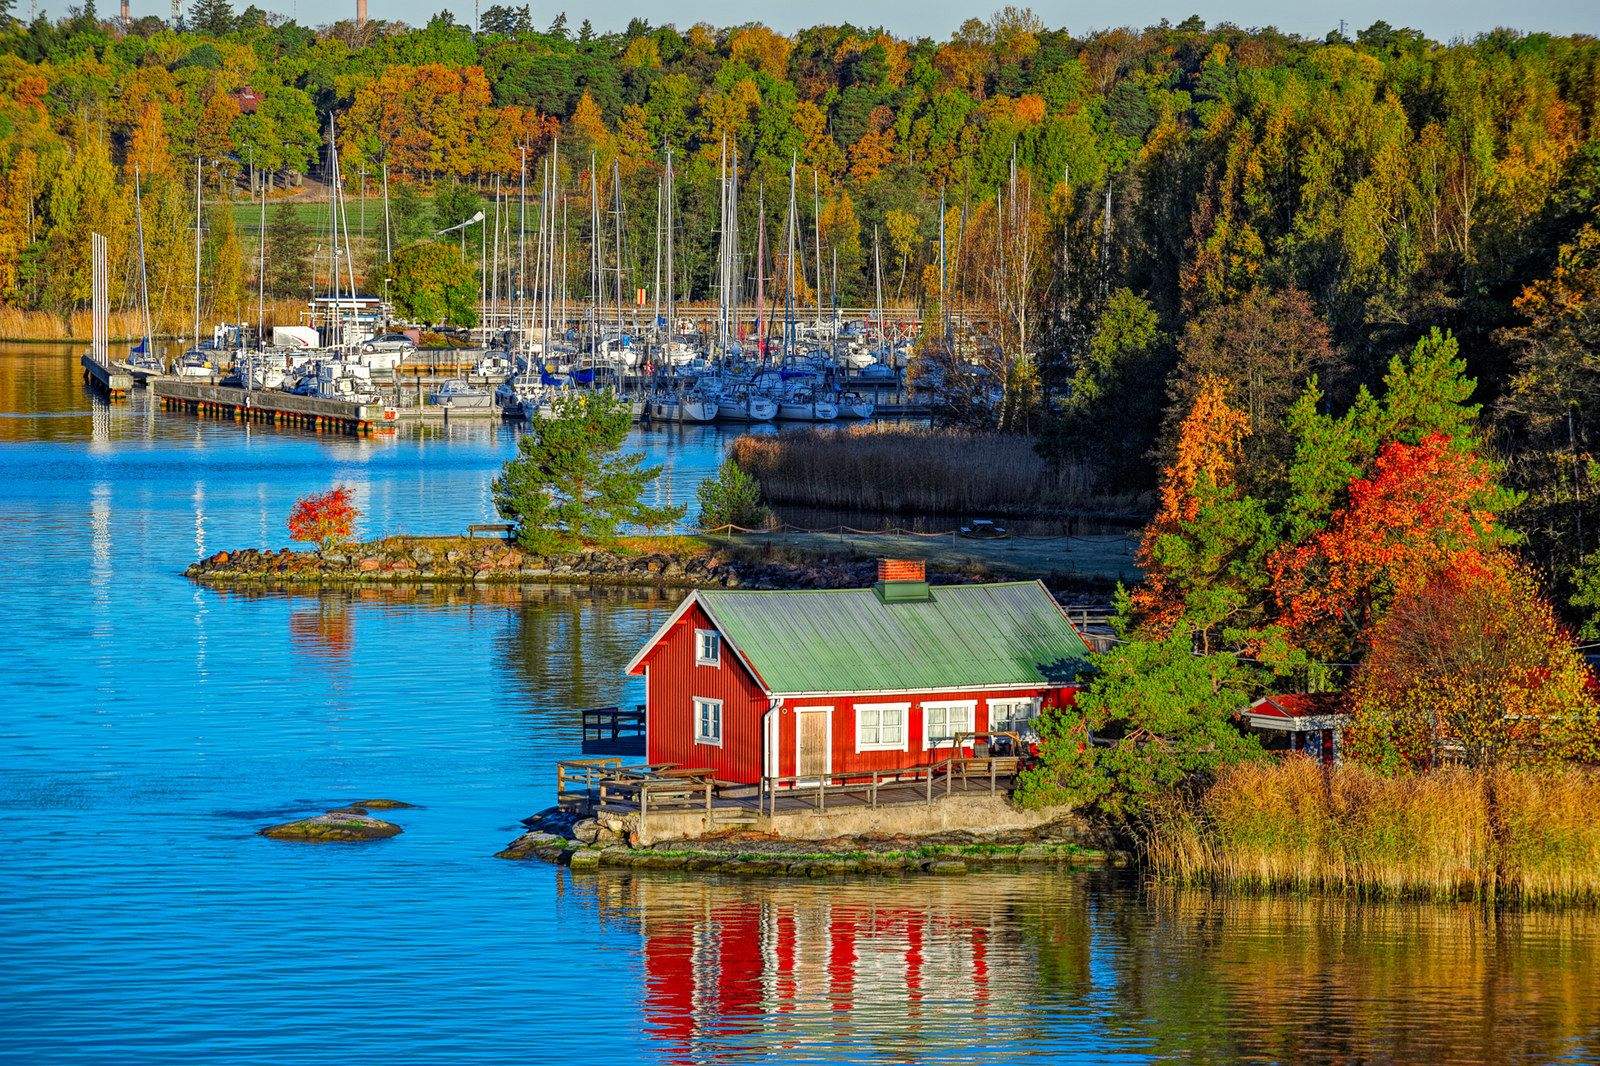 Pöytyä, Finland Travel Guide: Discover the Cultural Heritage and Natural Beauty of this Picturesque Destination